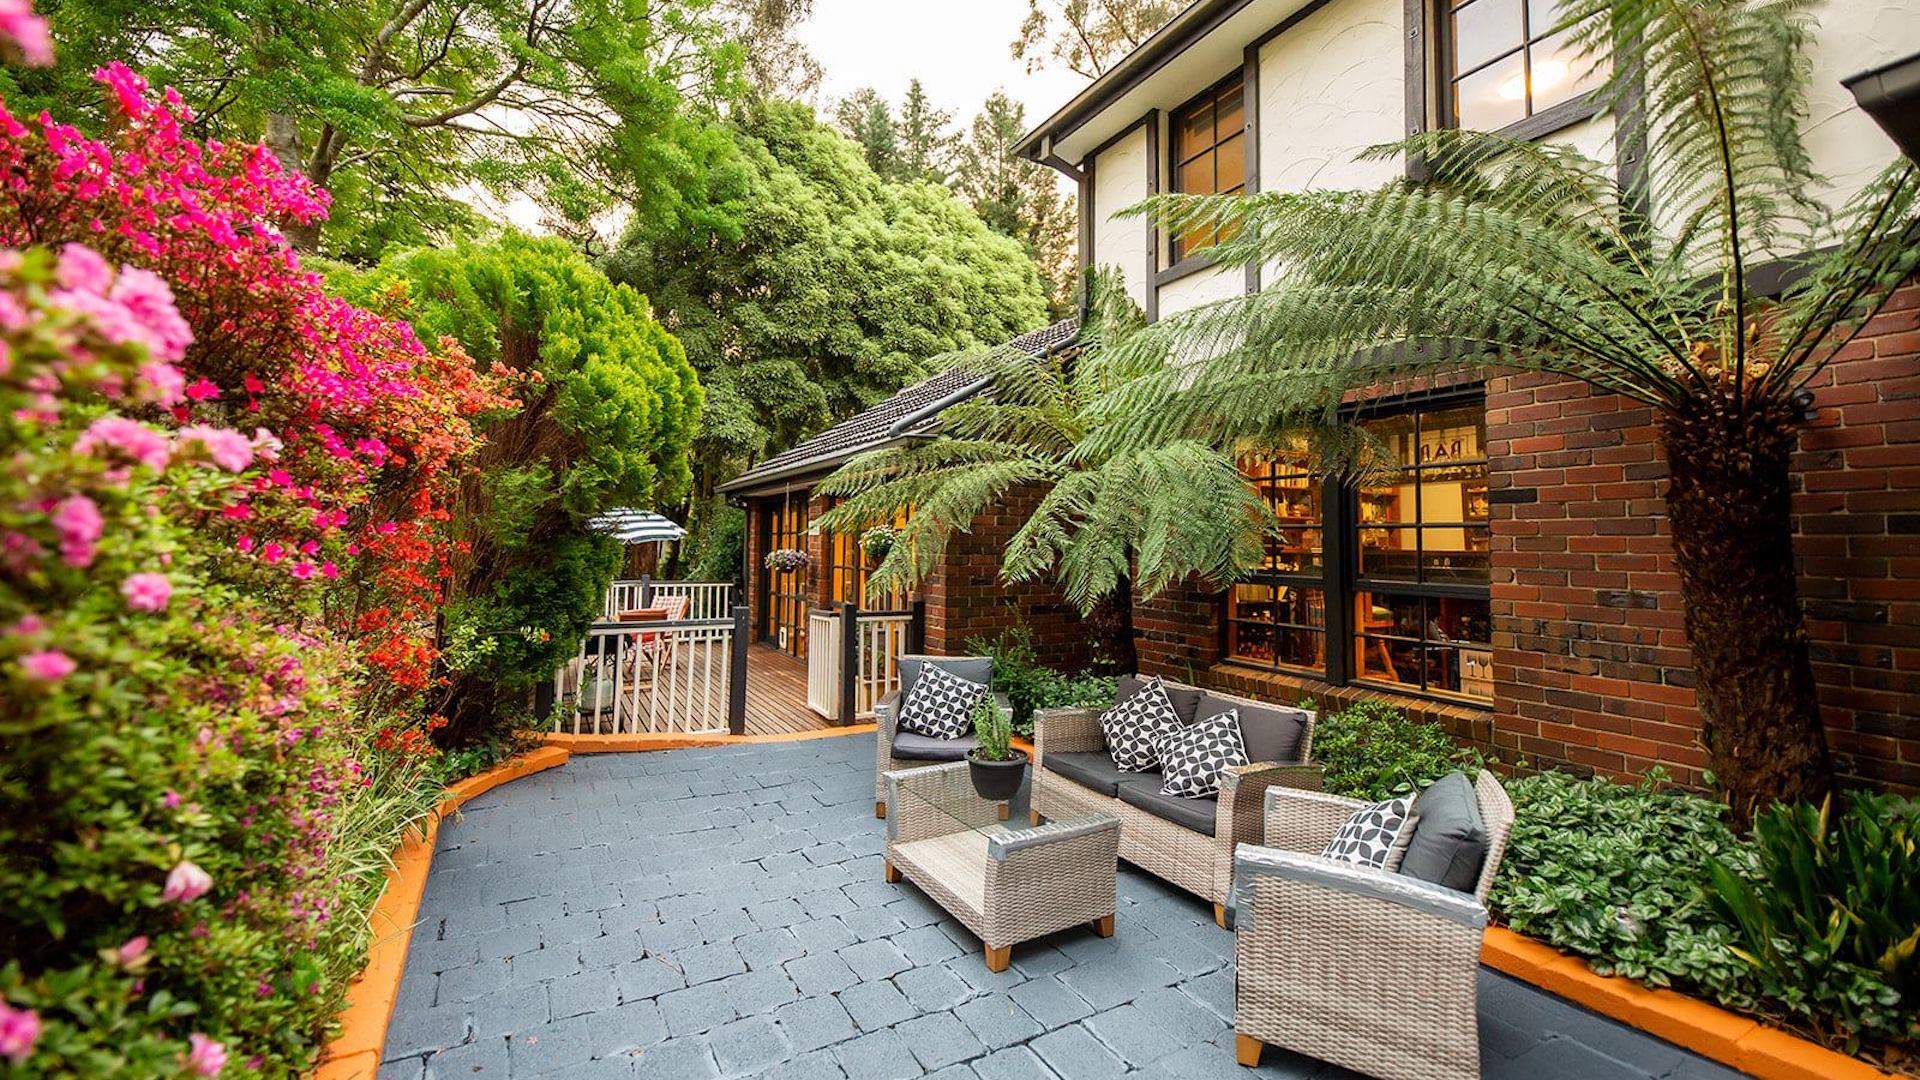 Best dog-friendly hotels Victoria, Melbourne - accommodations - Holly Lodge.